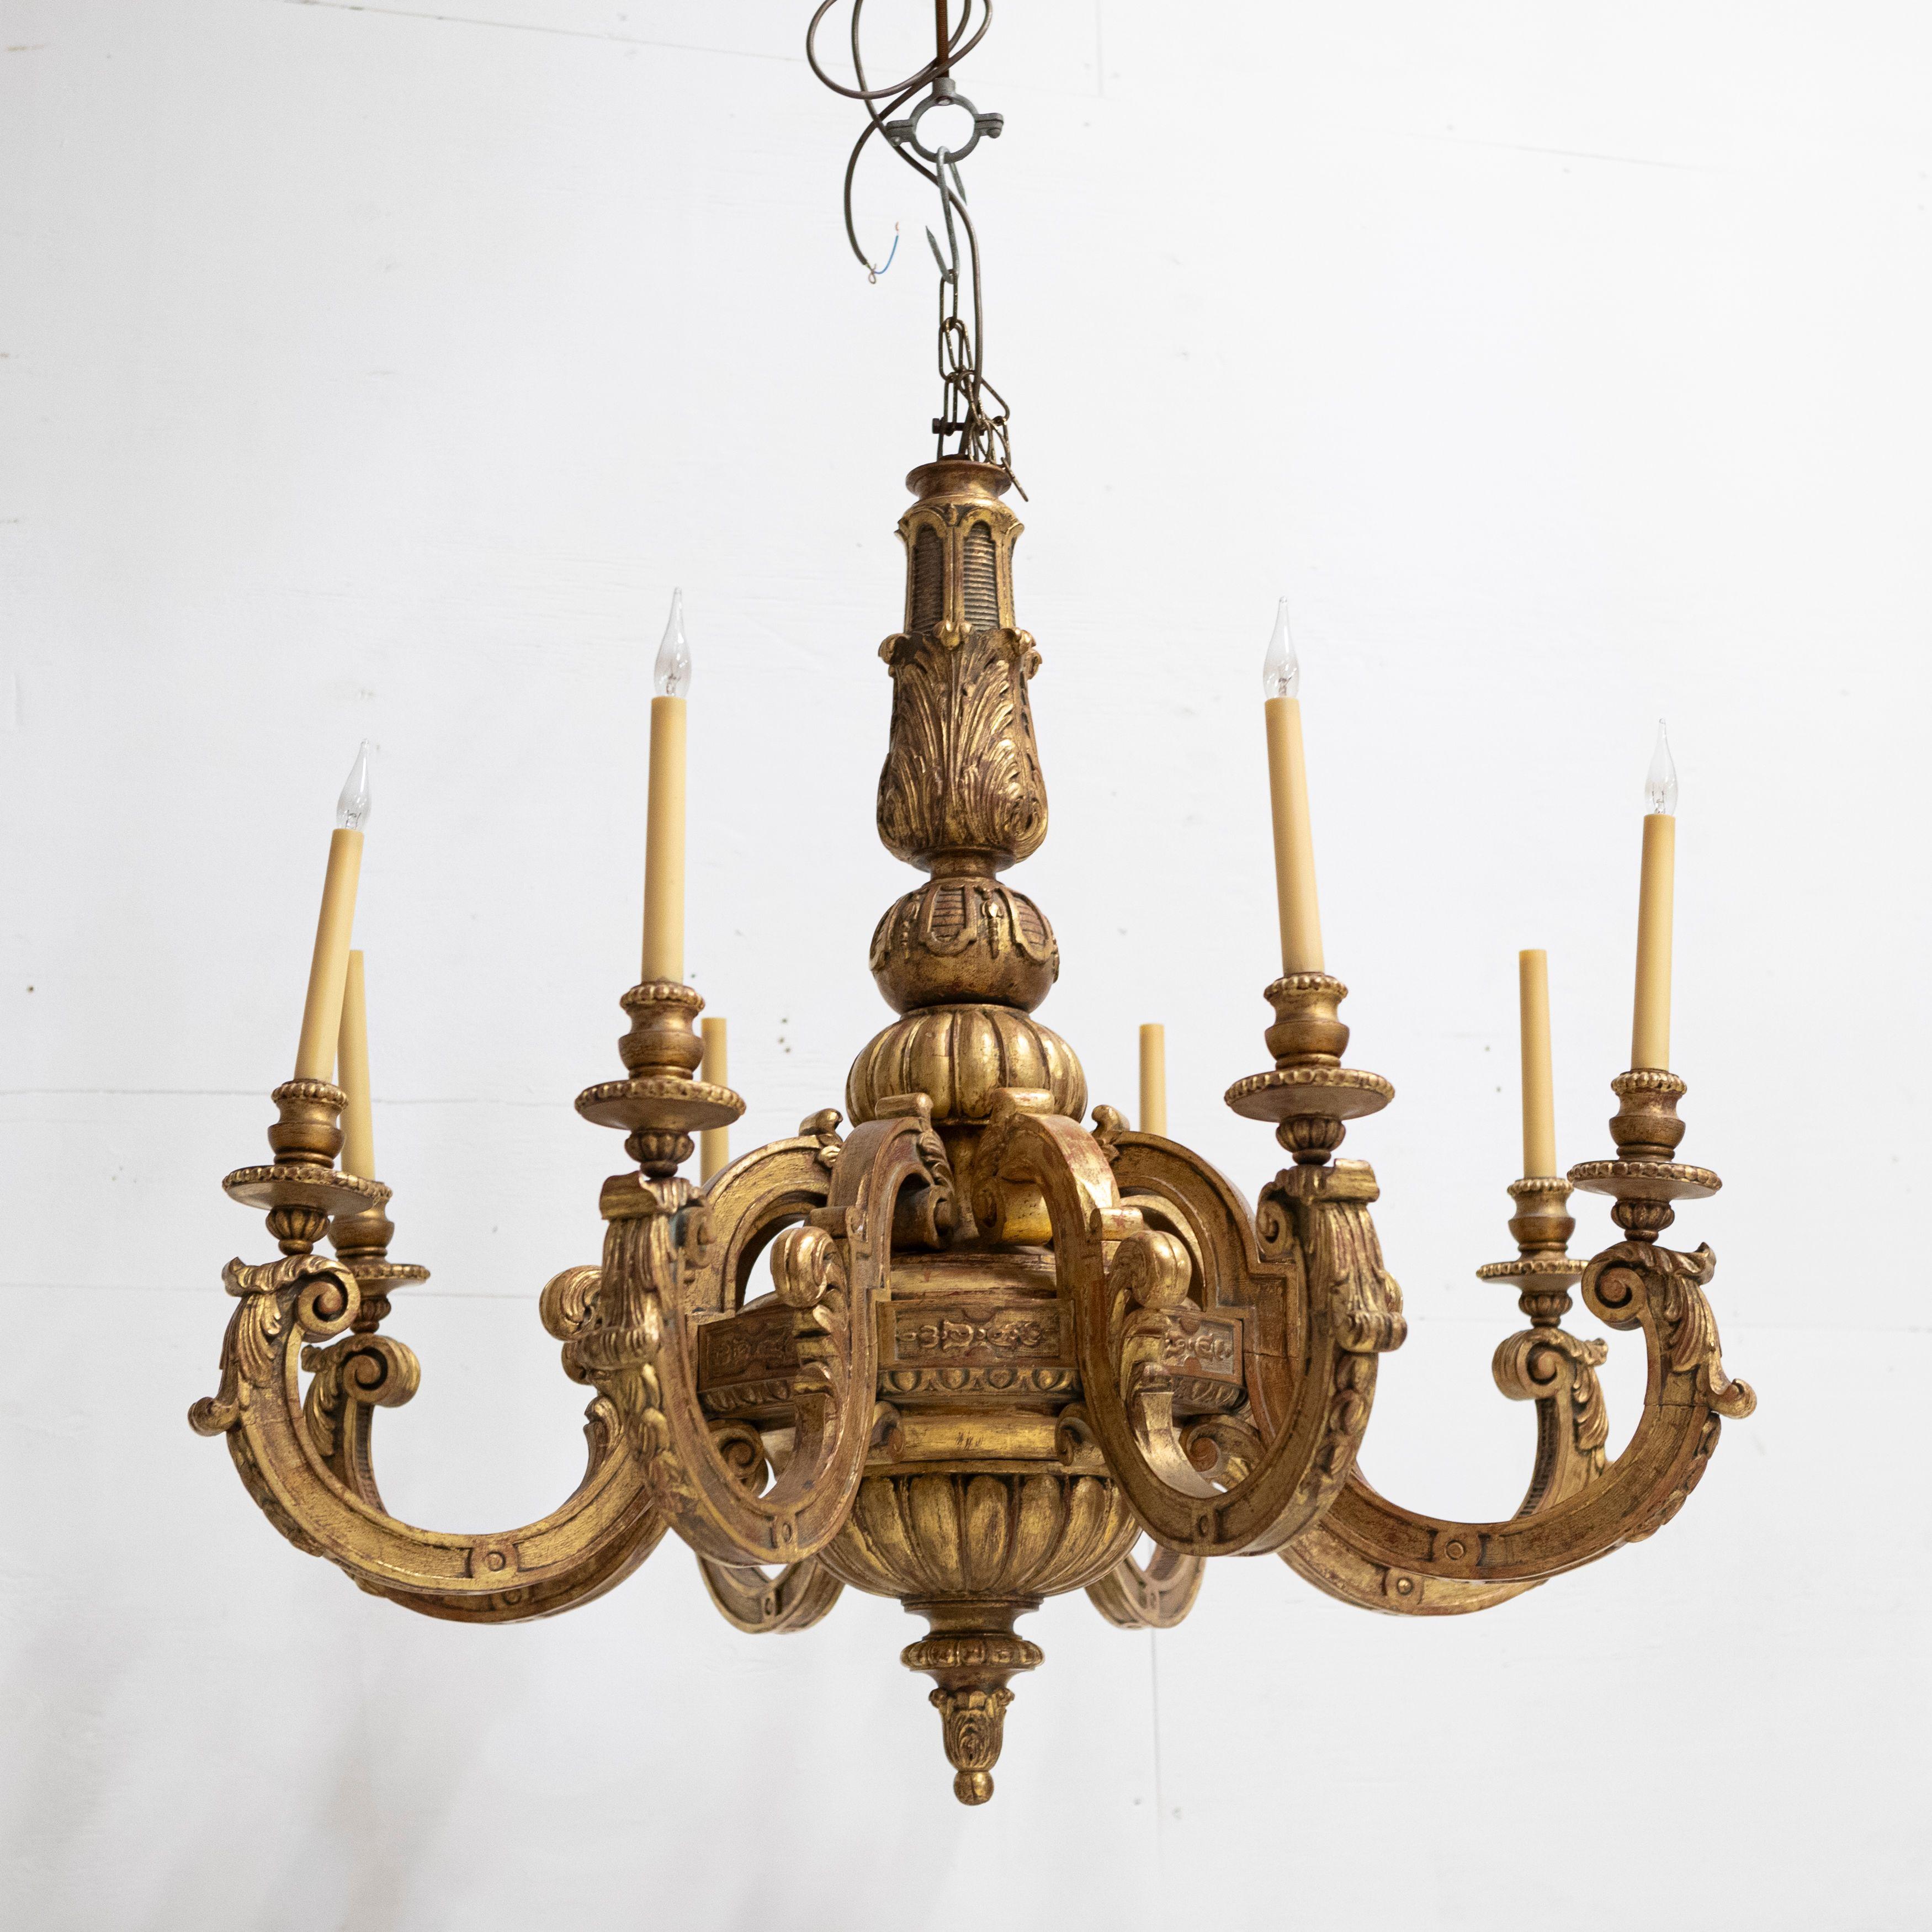 Large Antique Italian Giltwood 19th Century 8 Arm Chandelier For Sale 9